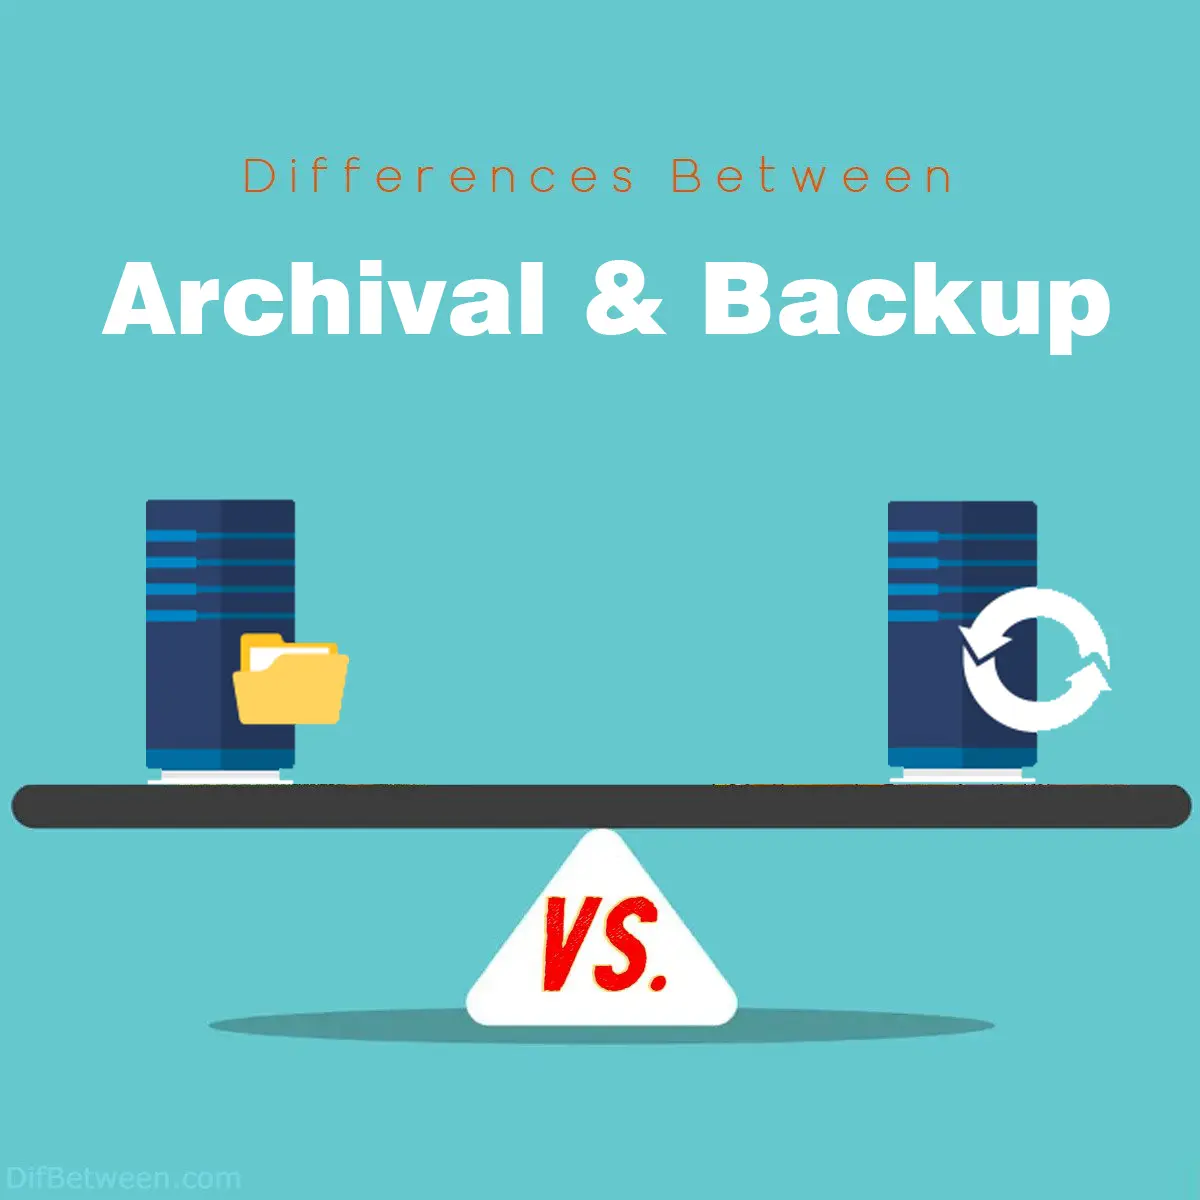 Differences Between Archival vs Backup